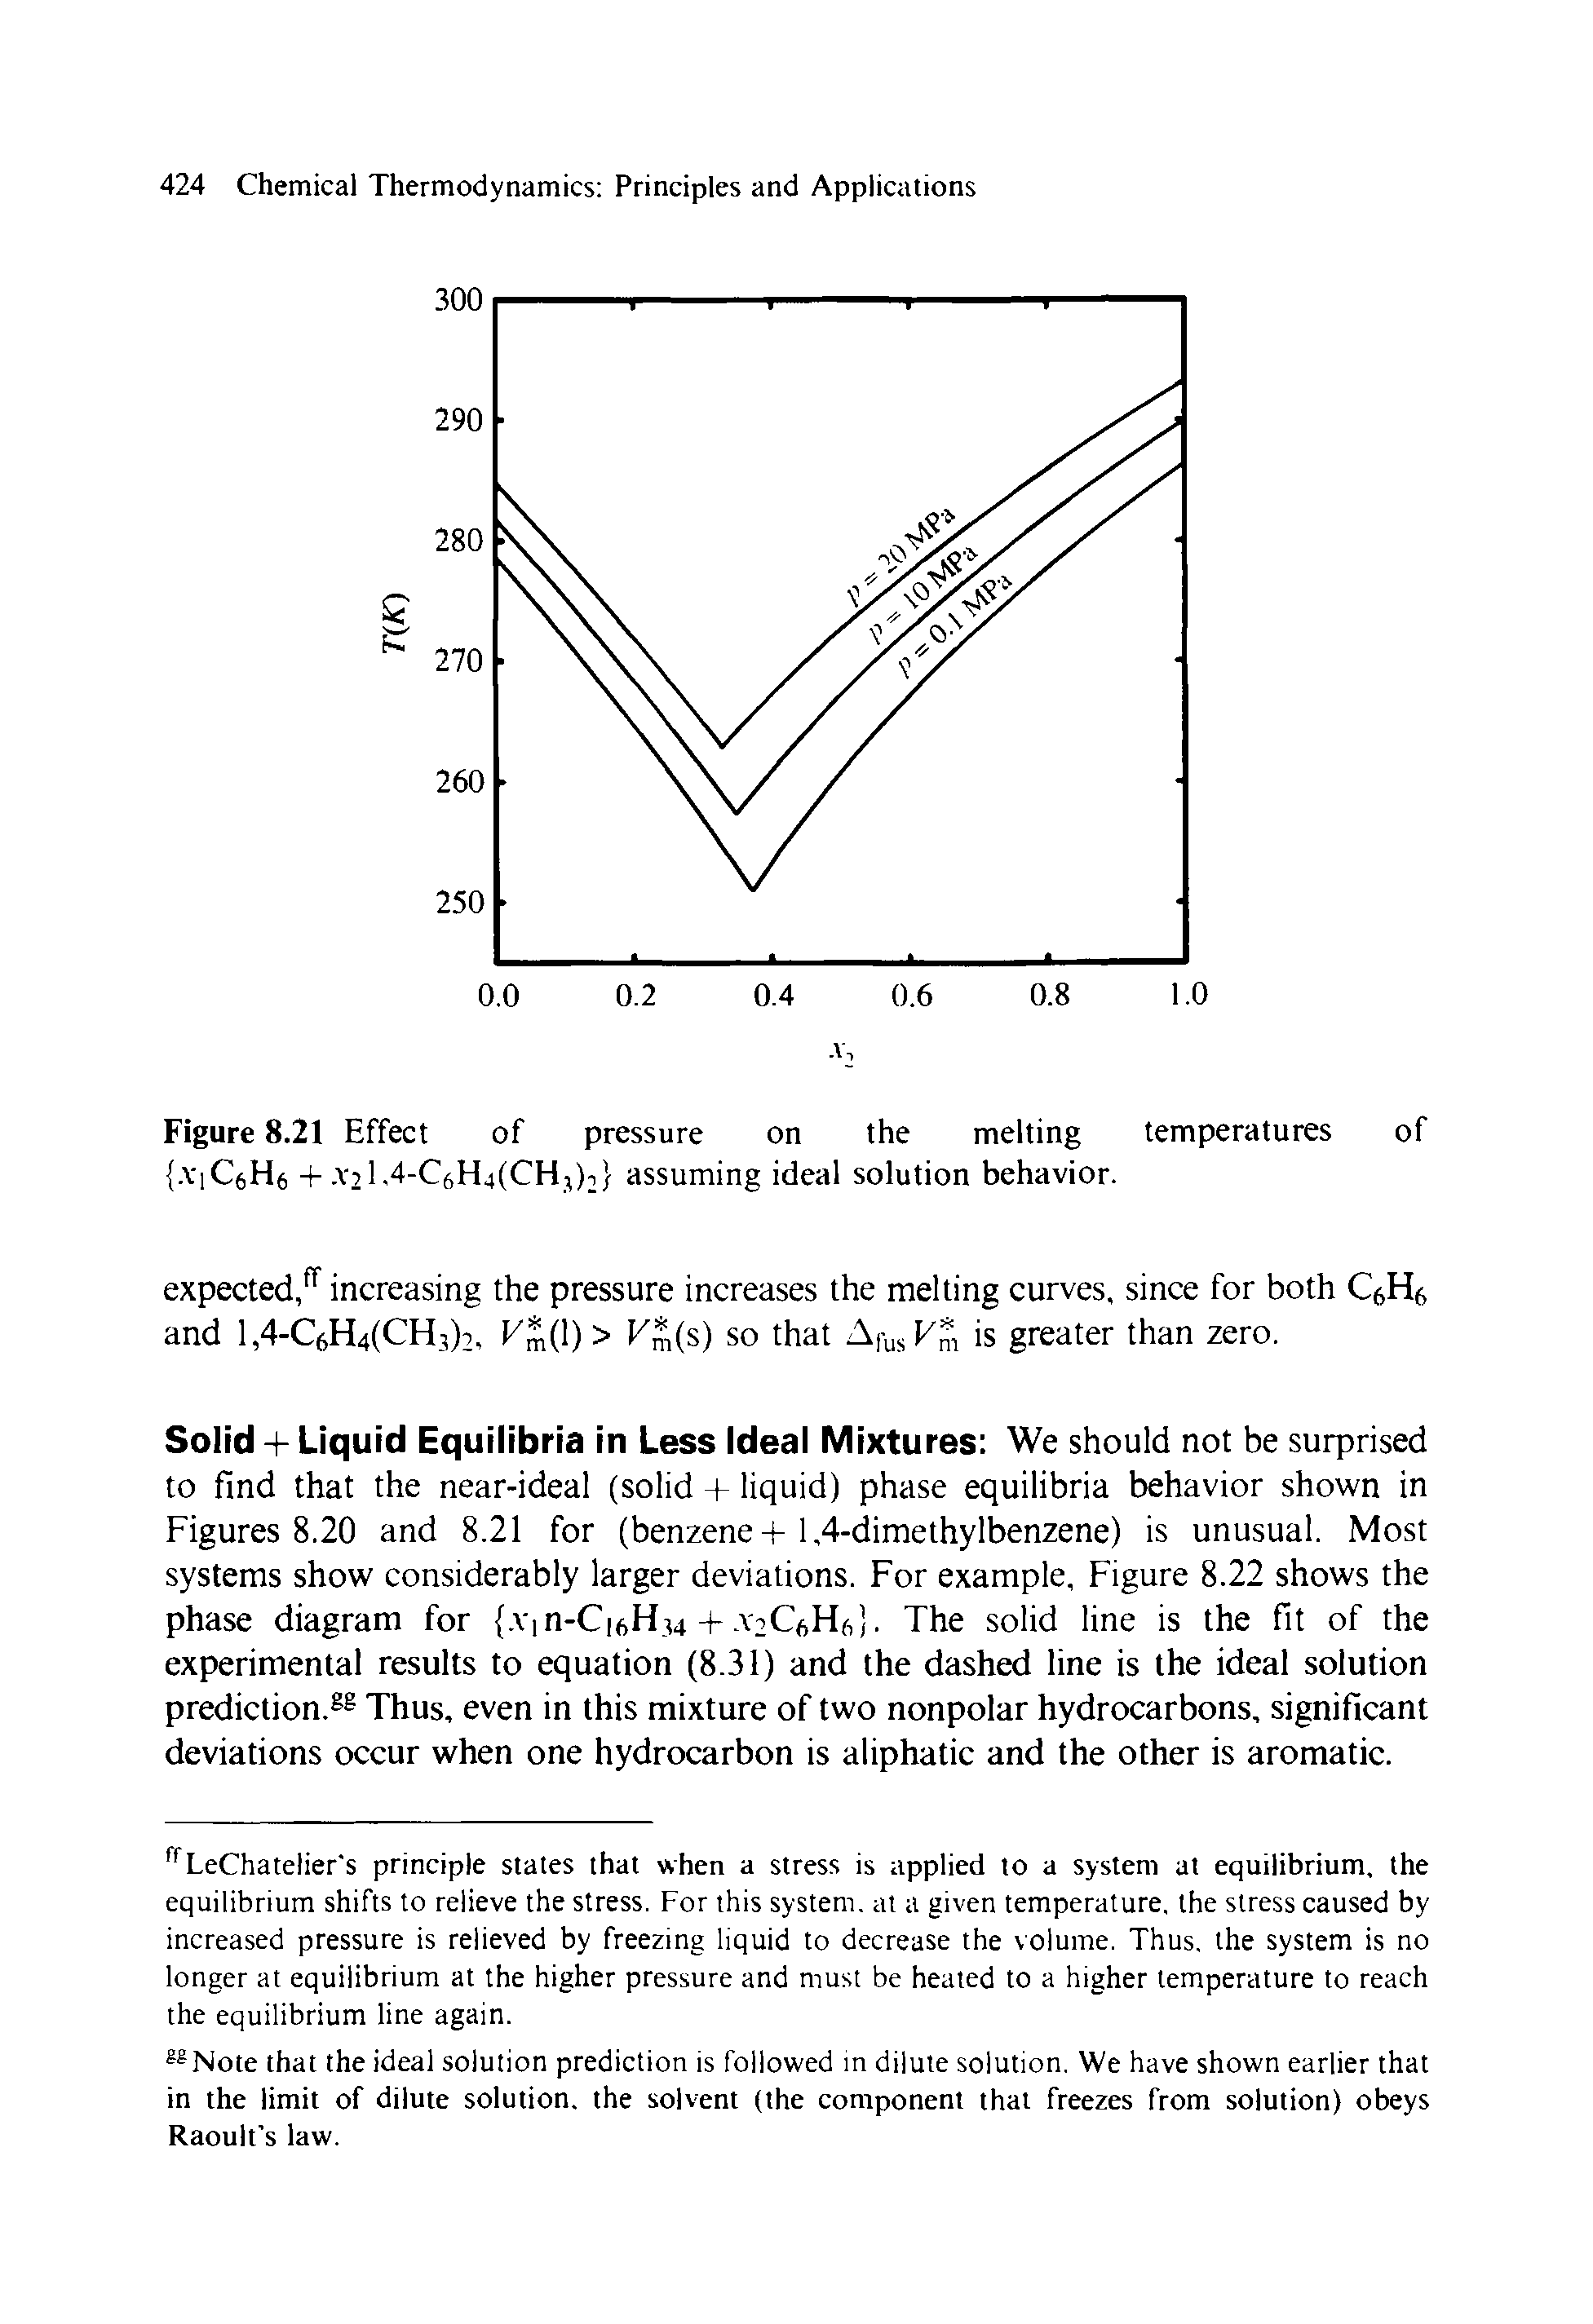 Figure 8.21 Effect of pressure on the melting temperatures of. ViCftHft + assuming ideal solution behavior.